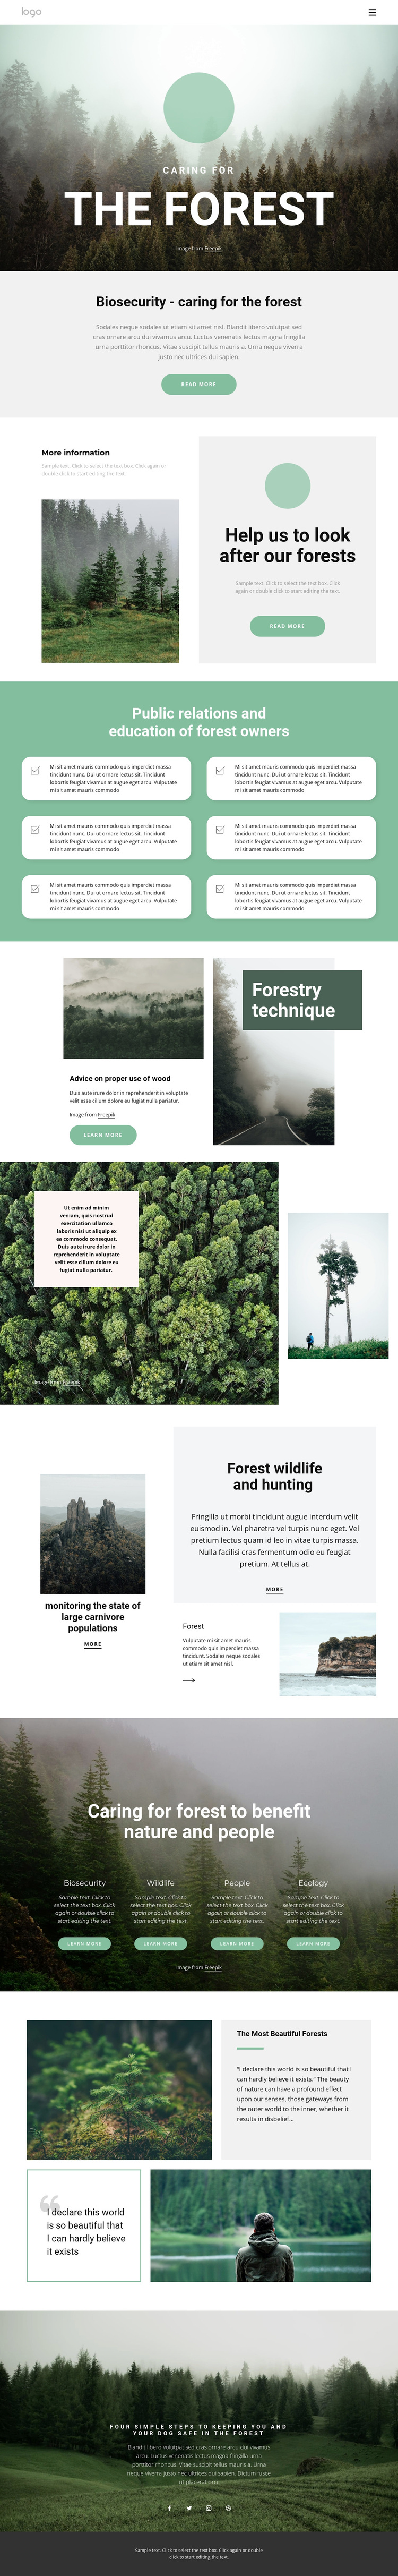 Caring for parks and forests Template